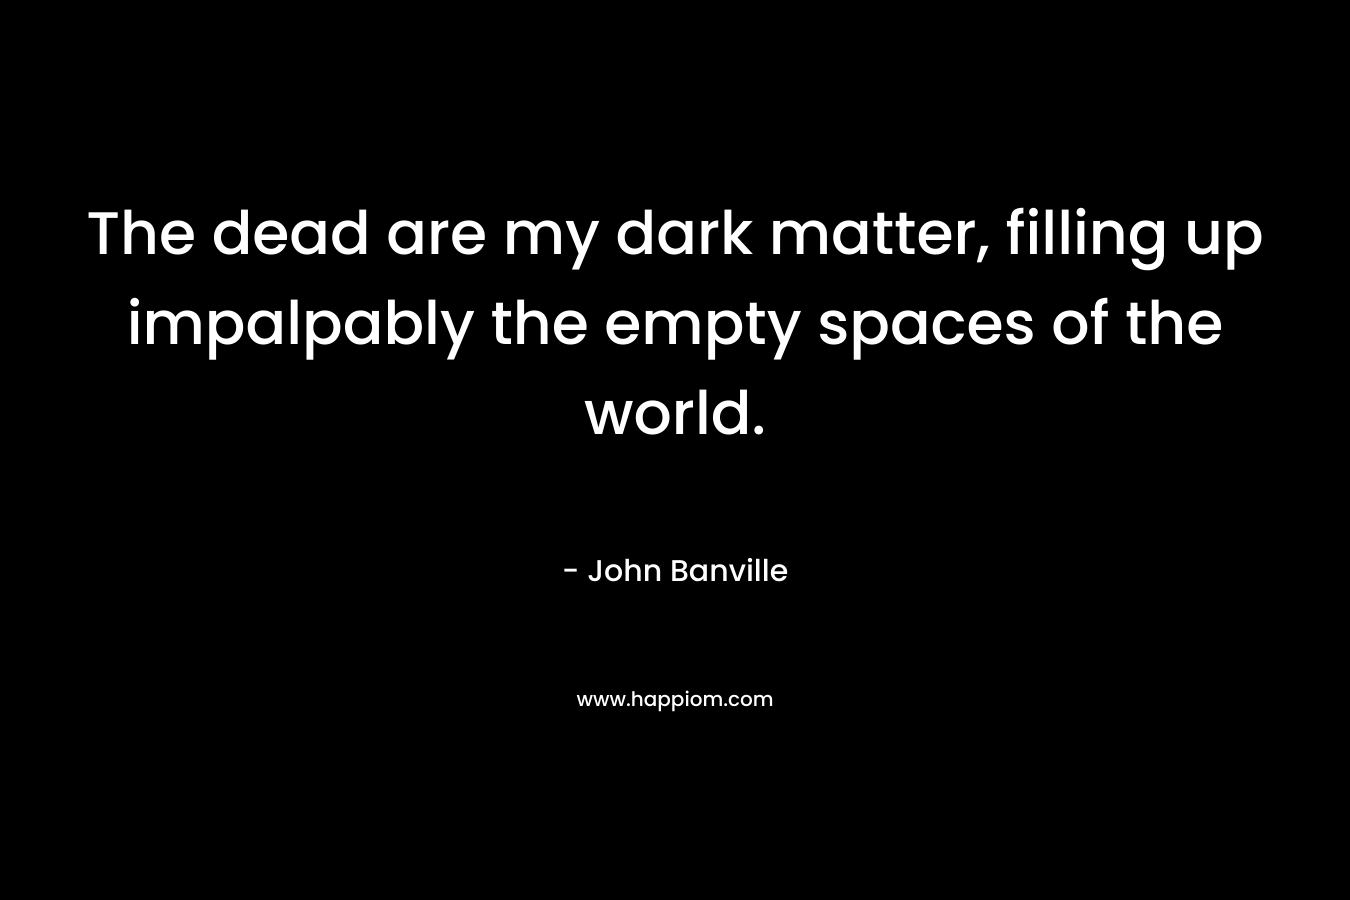 The dead are my dark matter, filling up impalpably the empty spaces of the world.